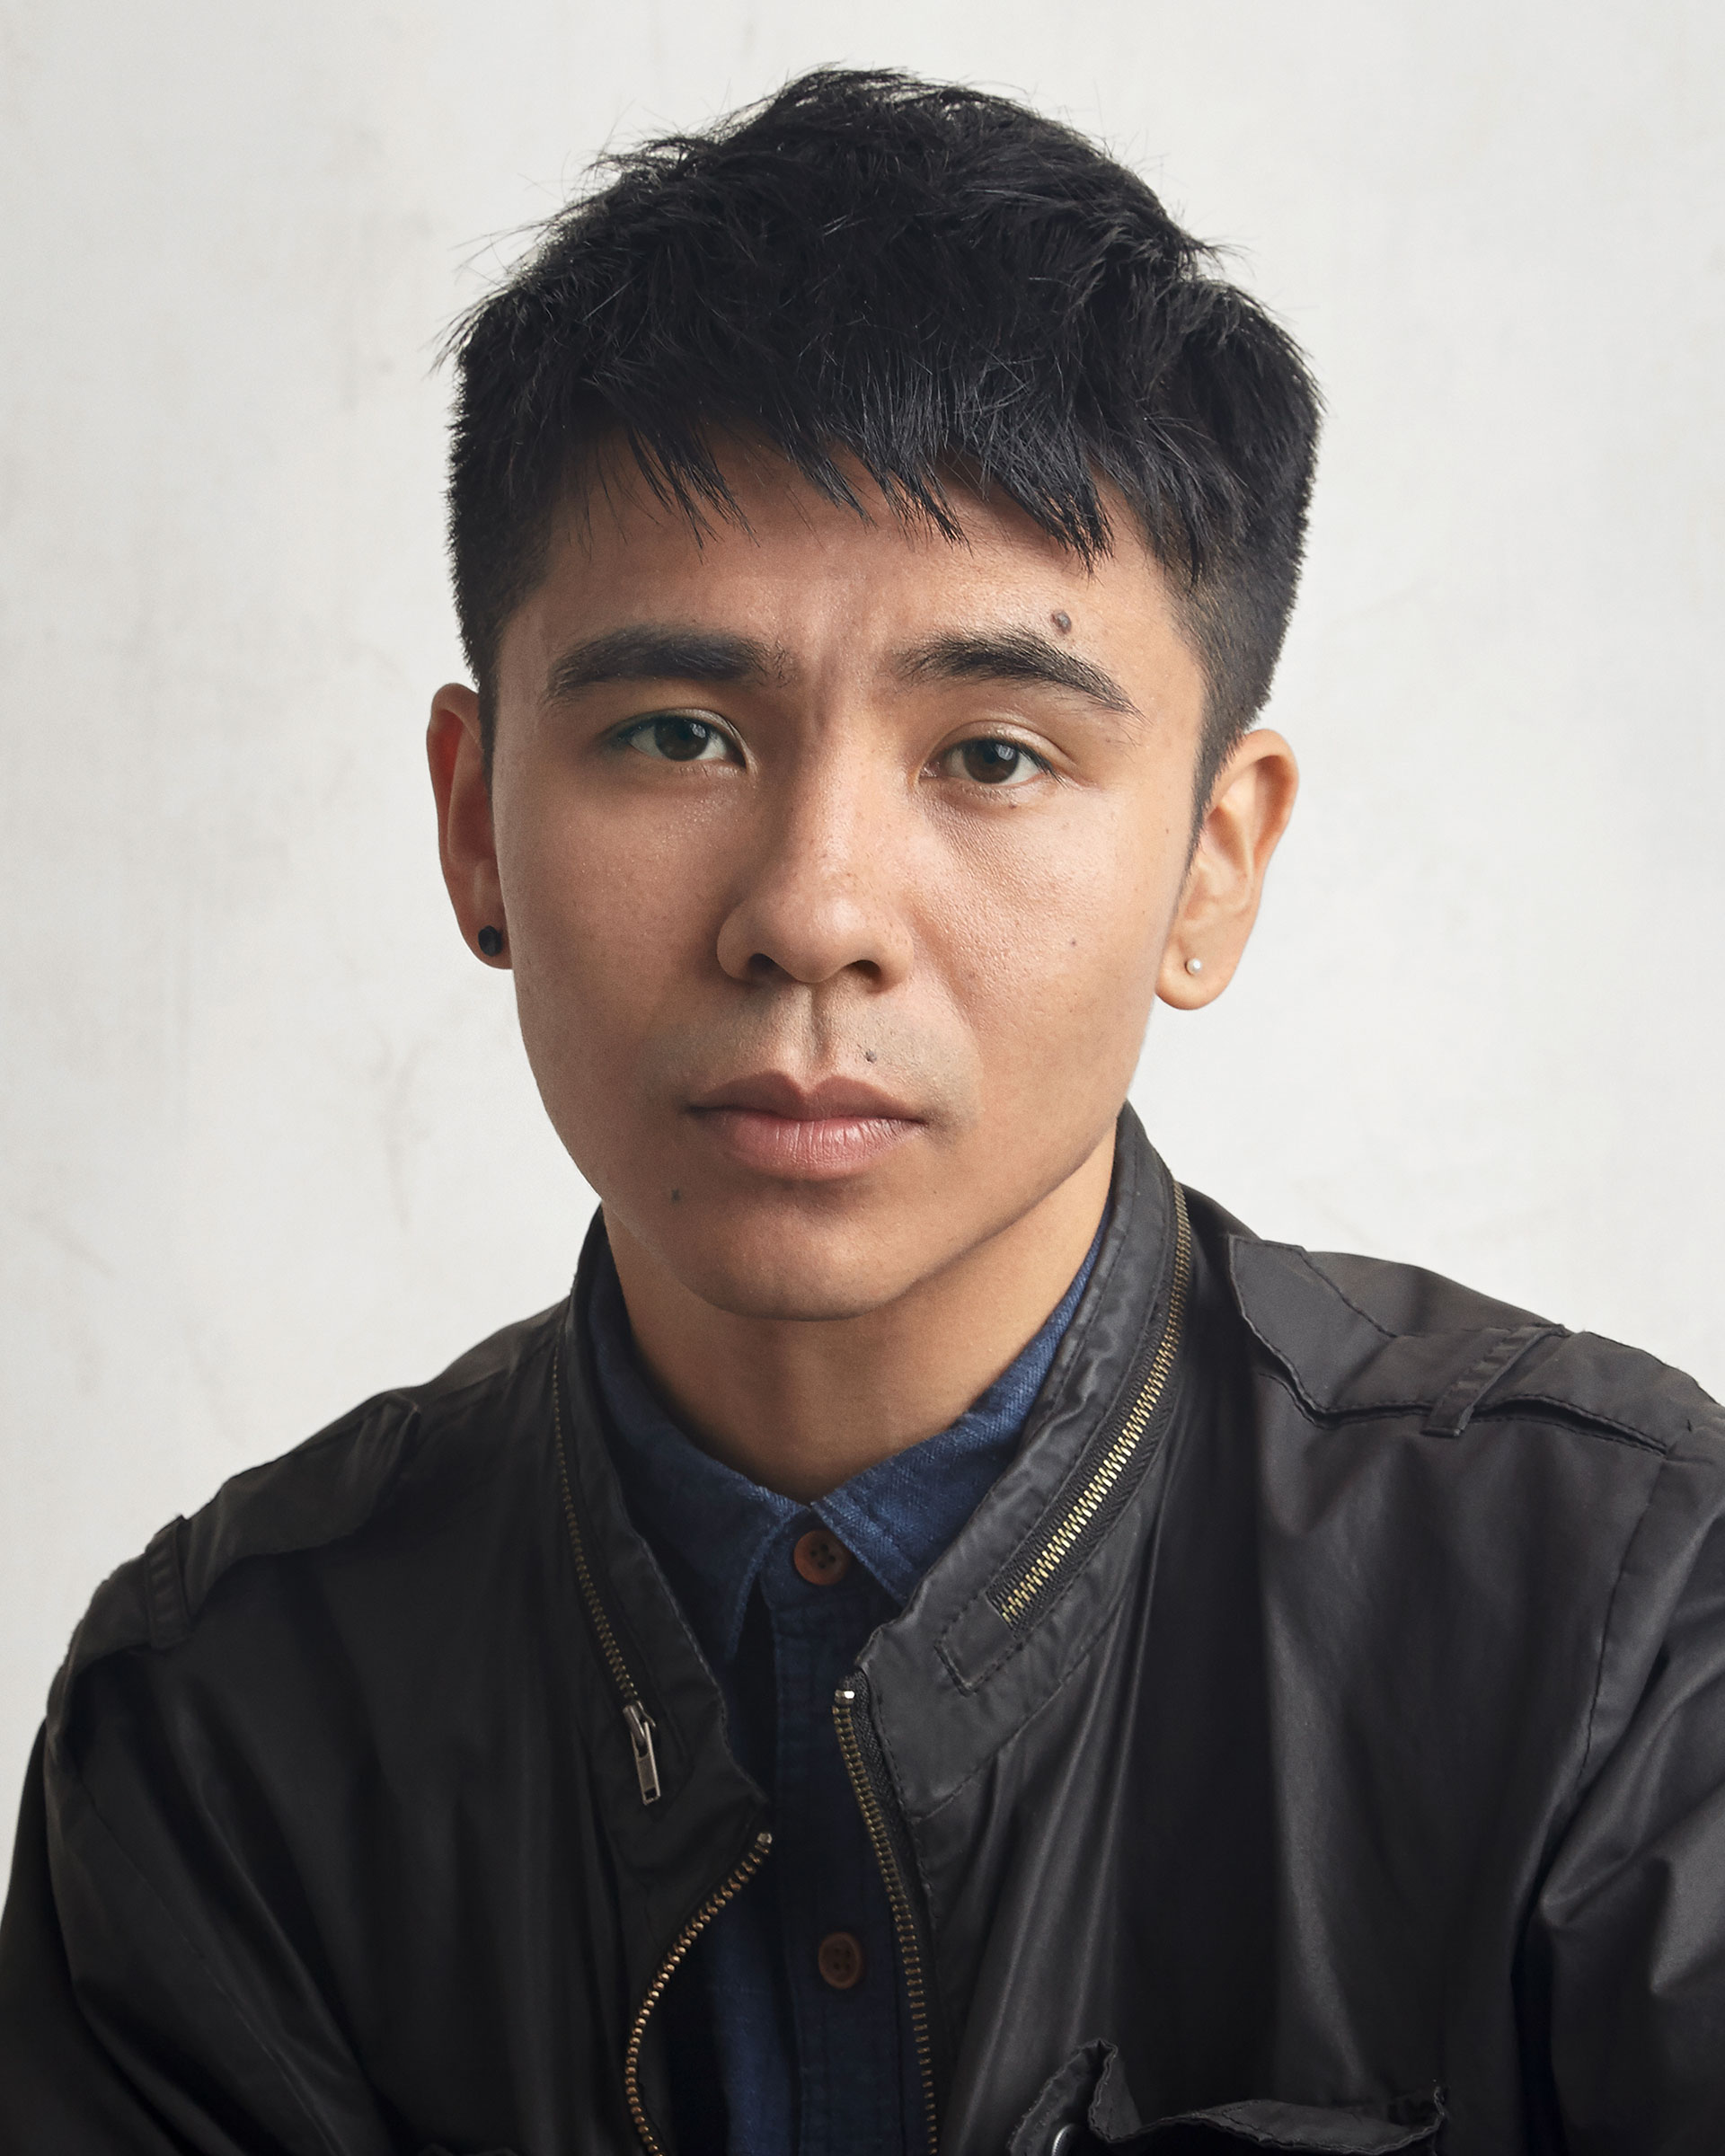 Vuong was born in Ho Chi Minh City and immigrated to the U.S. with his family as a child.